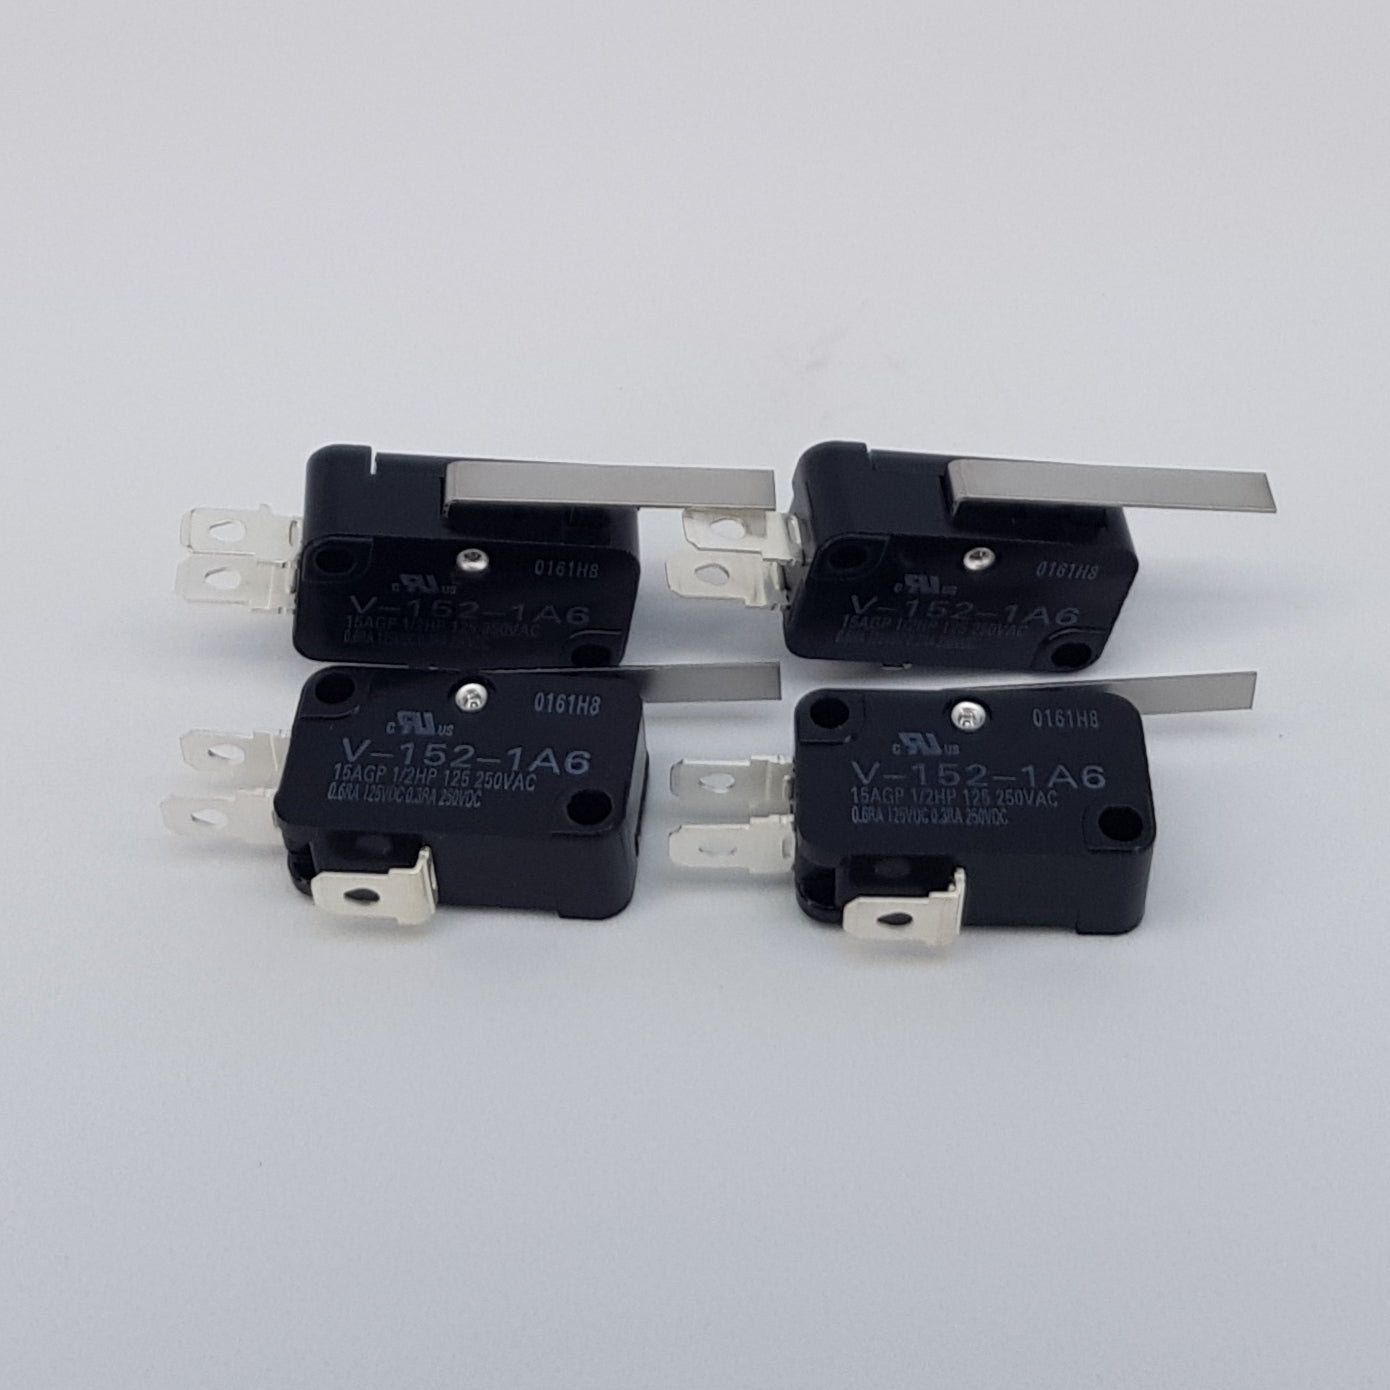 Omron V-152-1A6 microswitch pack (levered microswitch)